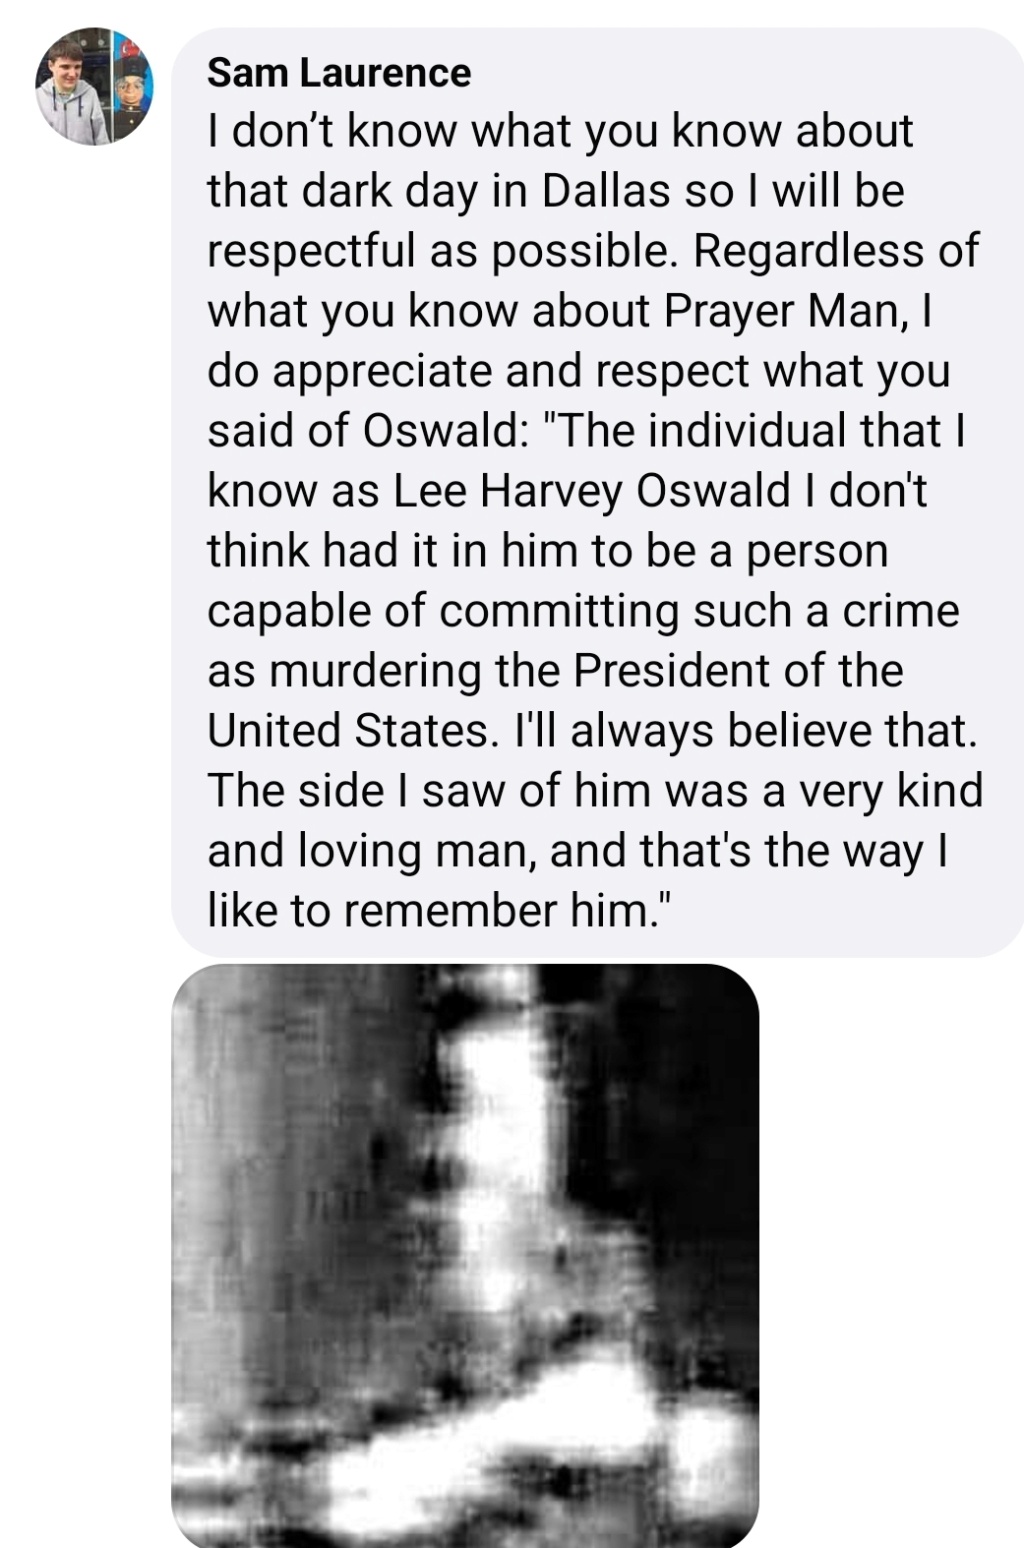 buell - Did Frazier Indirectly Identify Prayer Man  - Page 4 Scree919